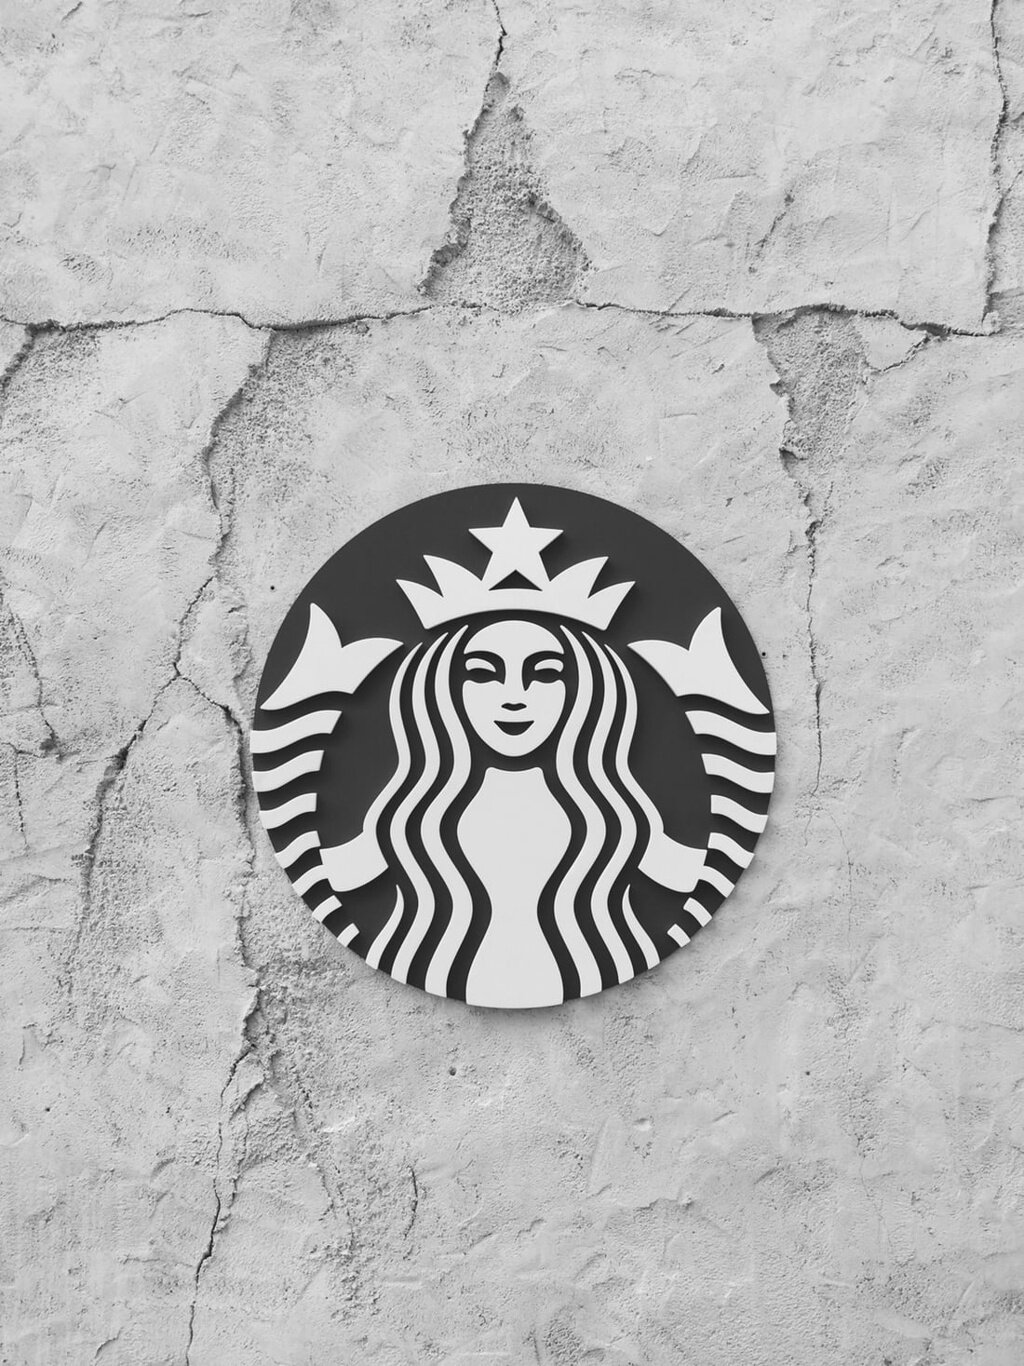 A Starbucks sign hangs on a rock wall.